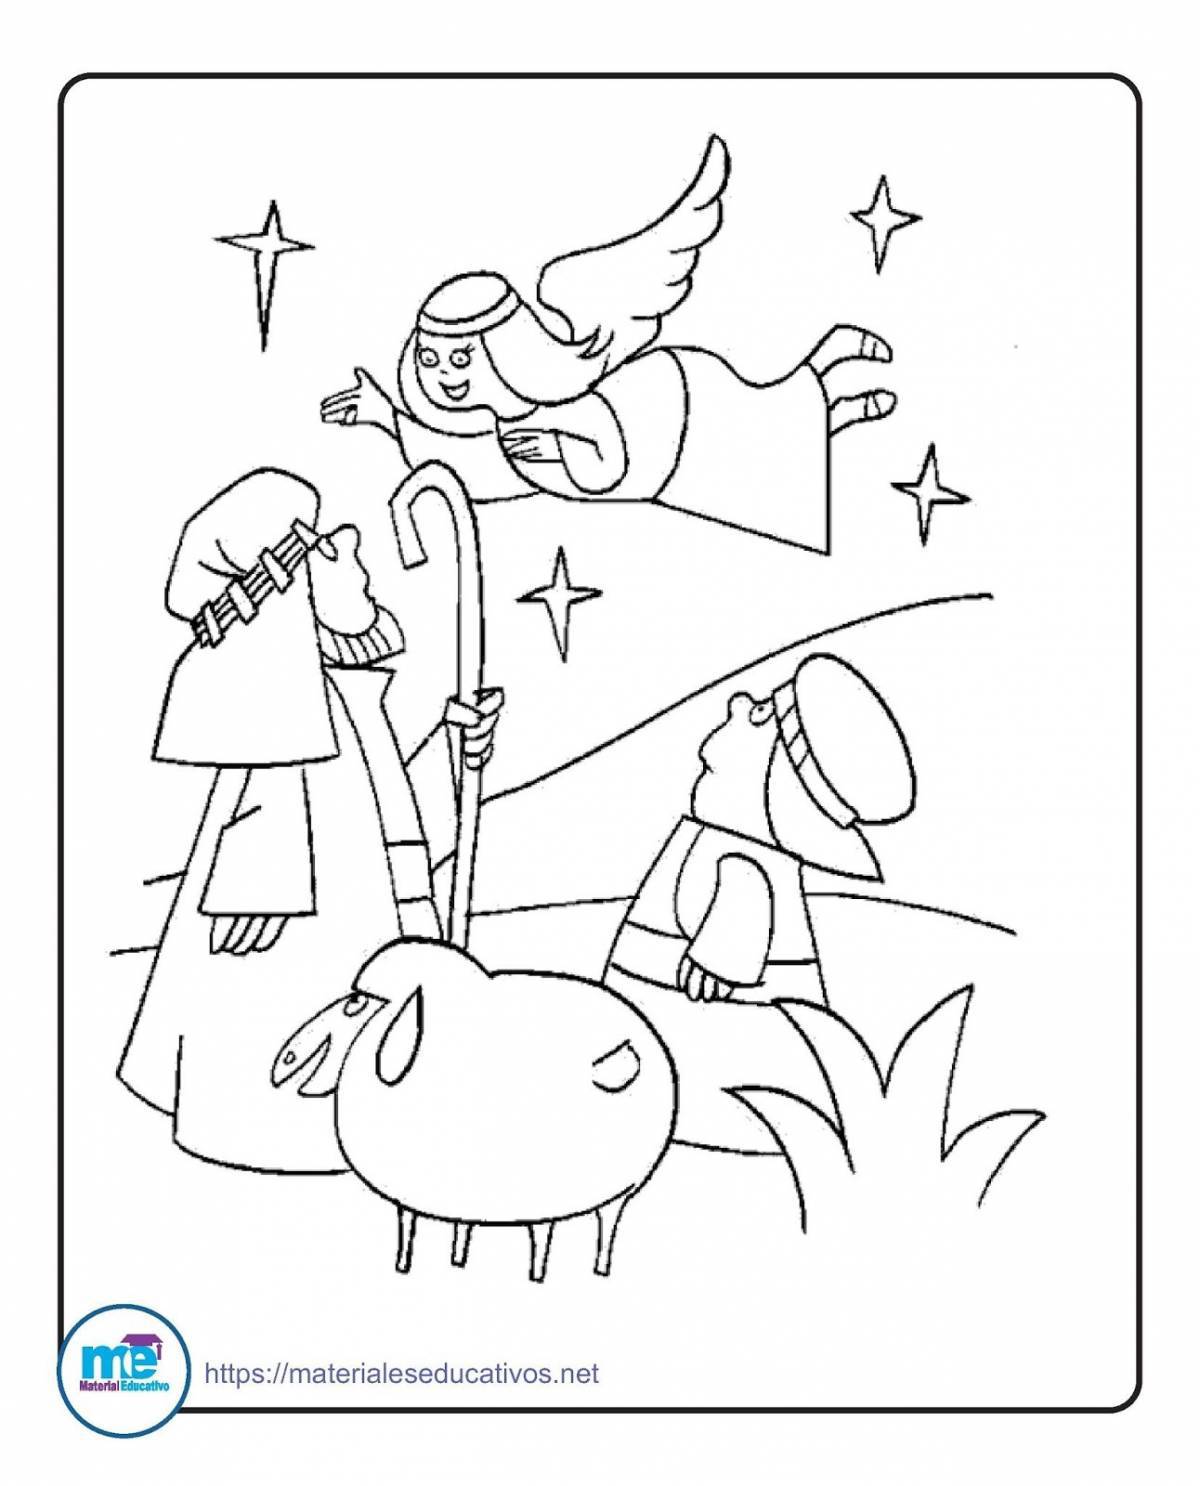 A playful Christmas coloring book for kids